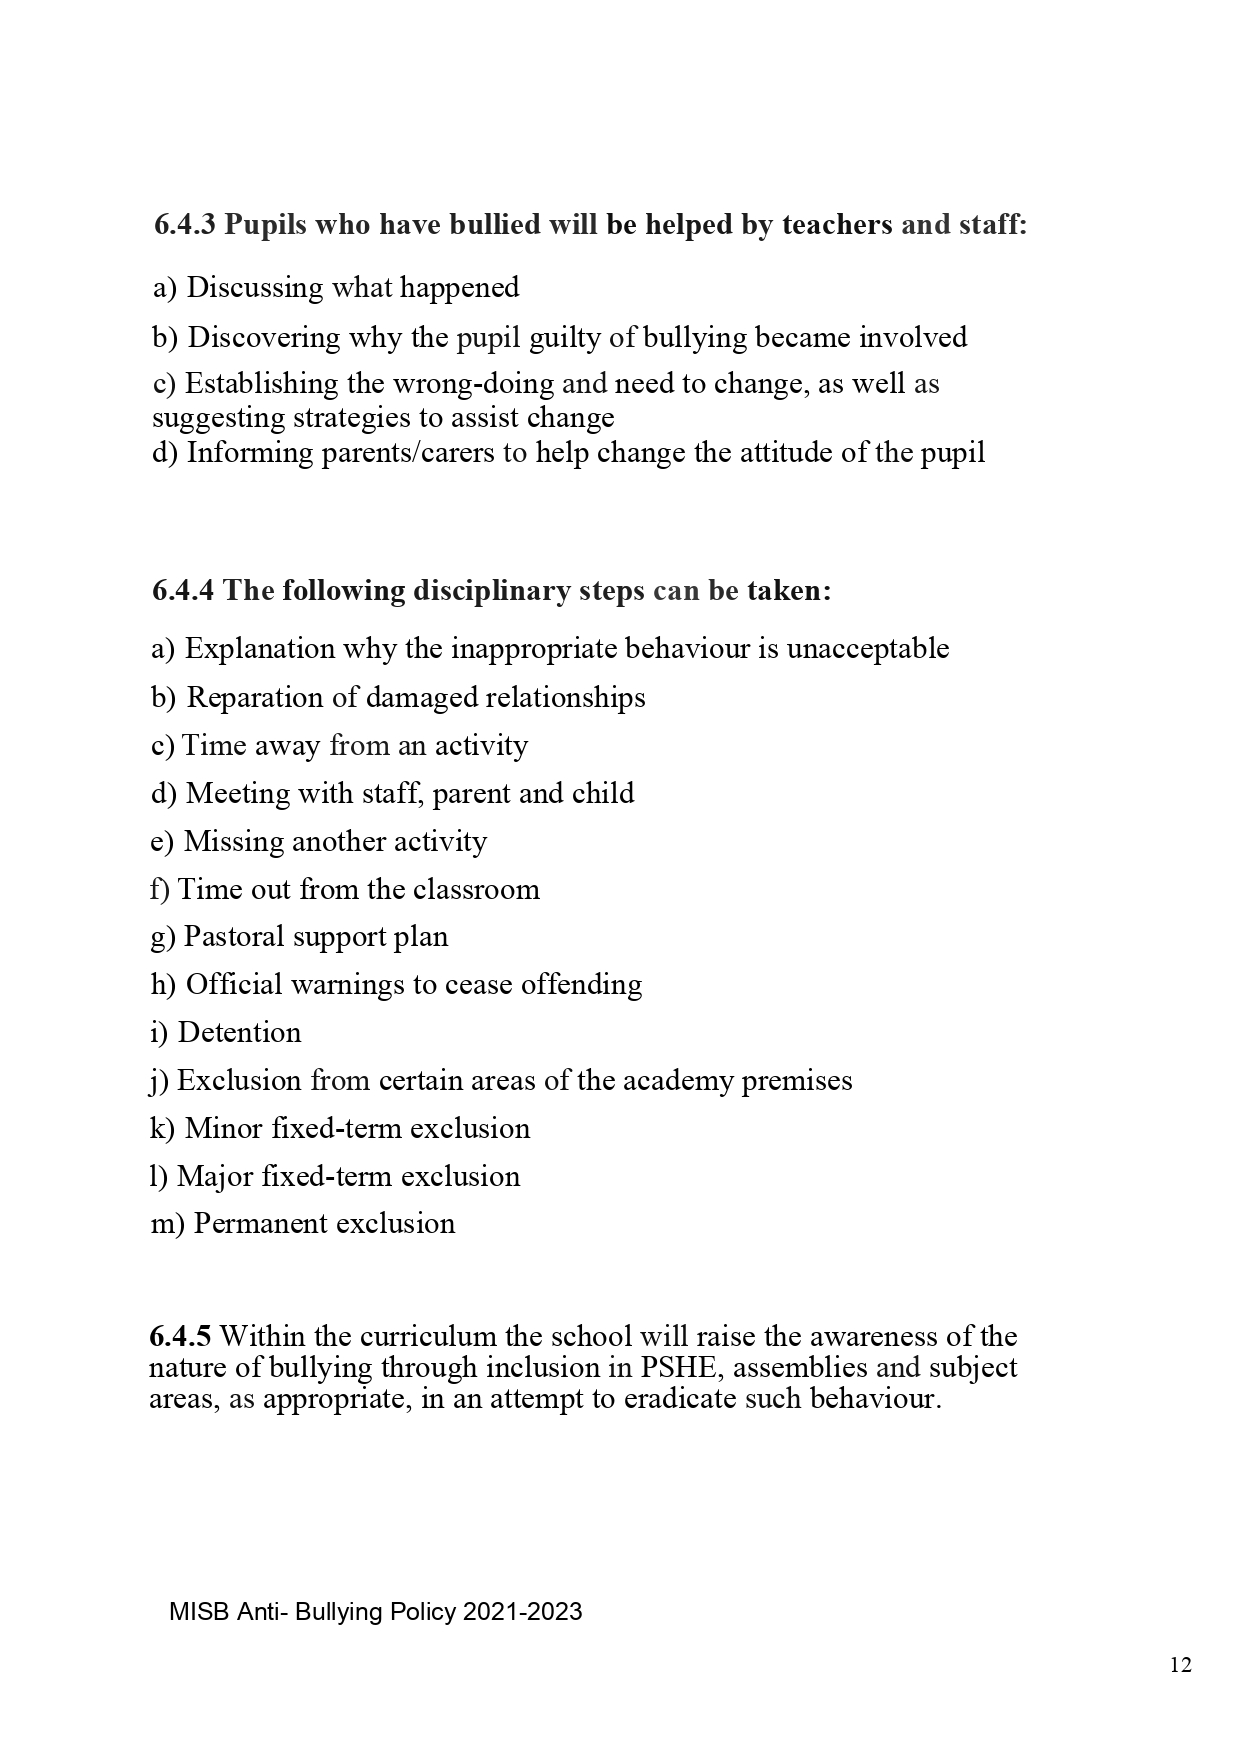 ANTI BULLYING POLICY 2021 2023 New page 0012